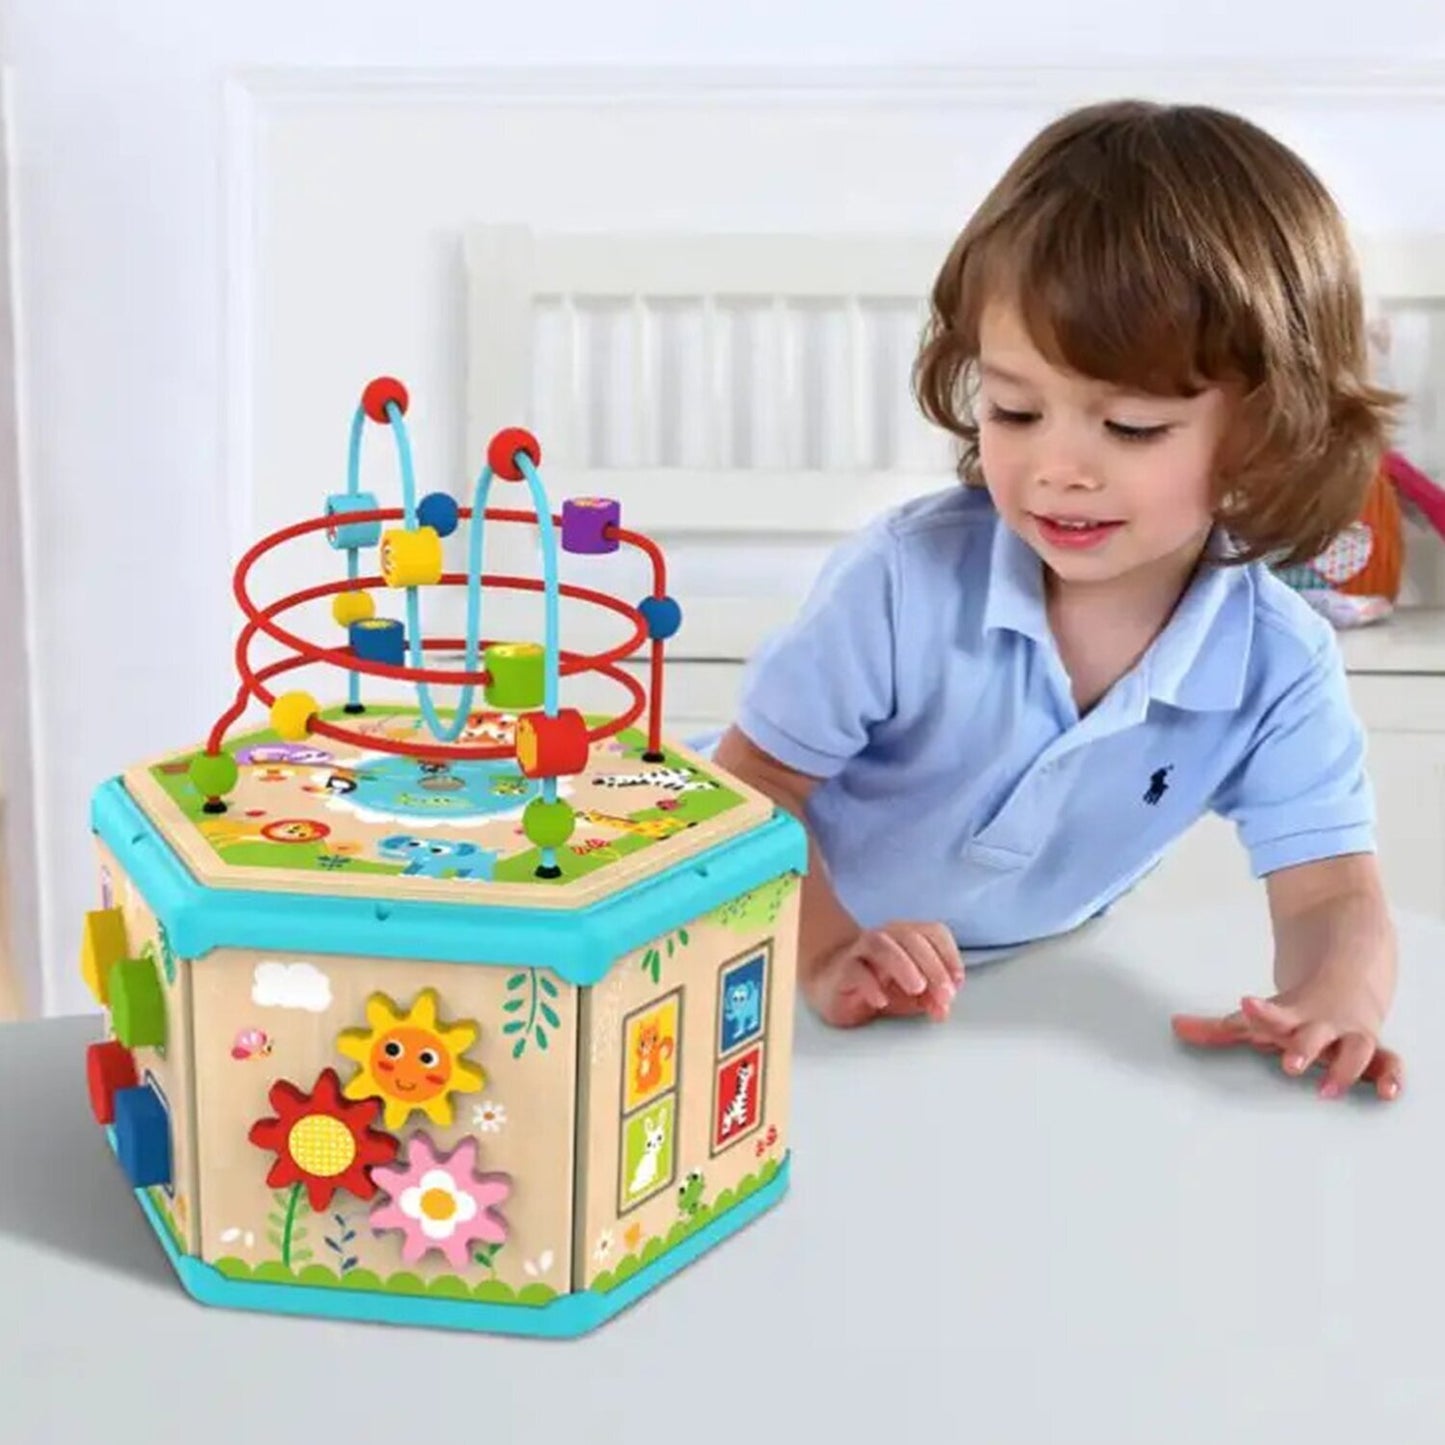 Tooky Toy Wooden 7-in-1 Activity Cube Play Station